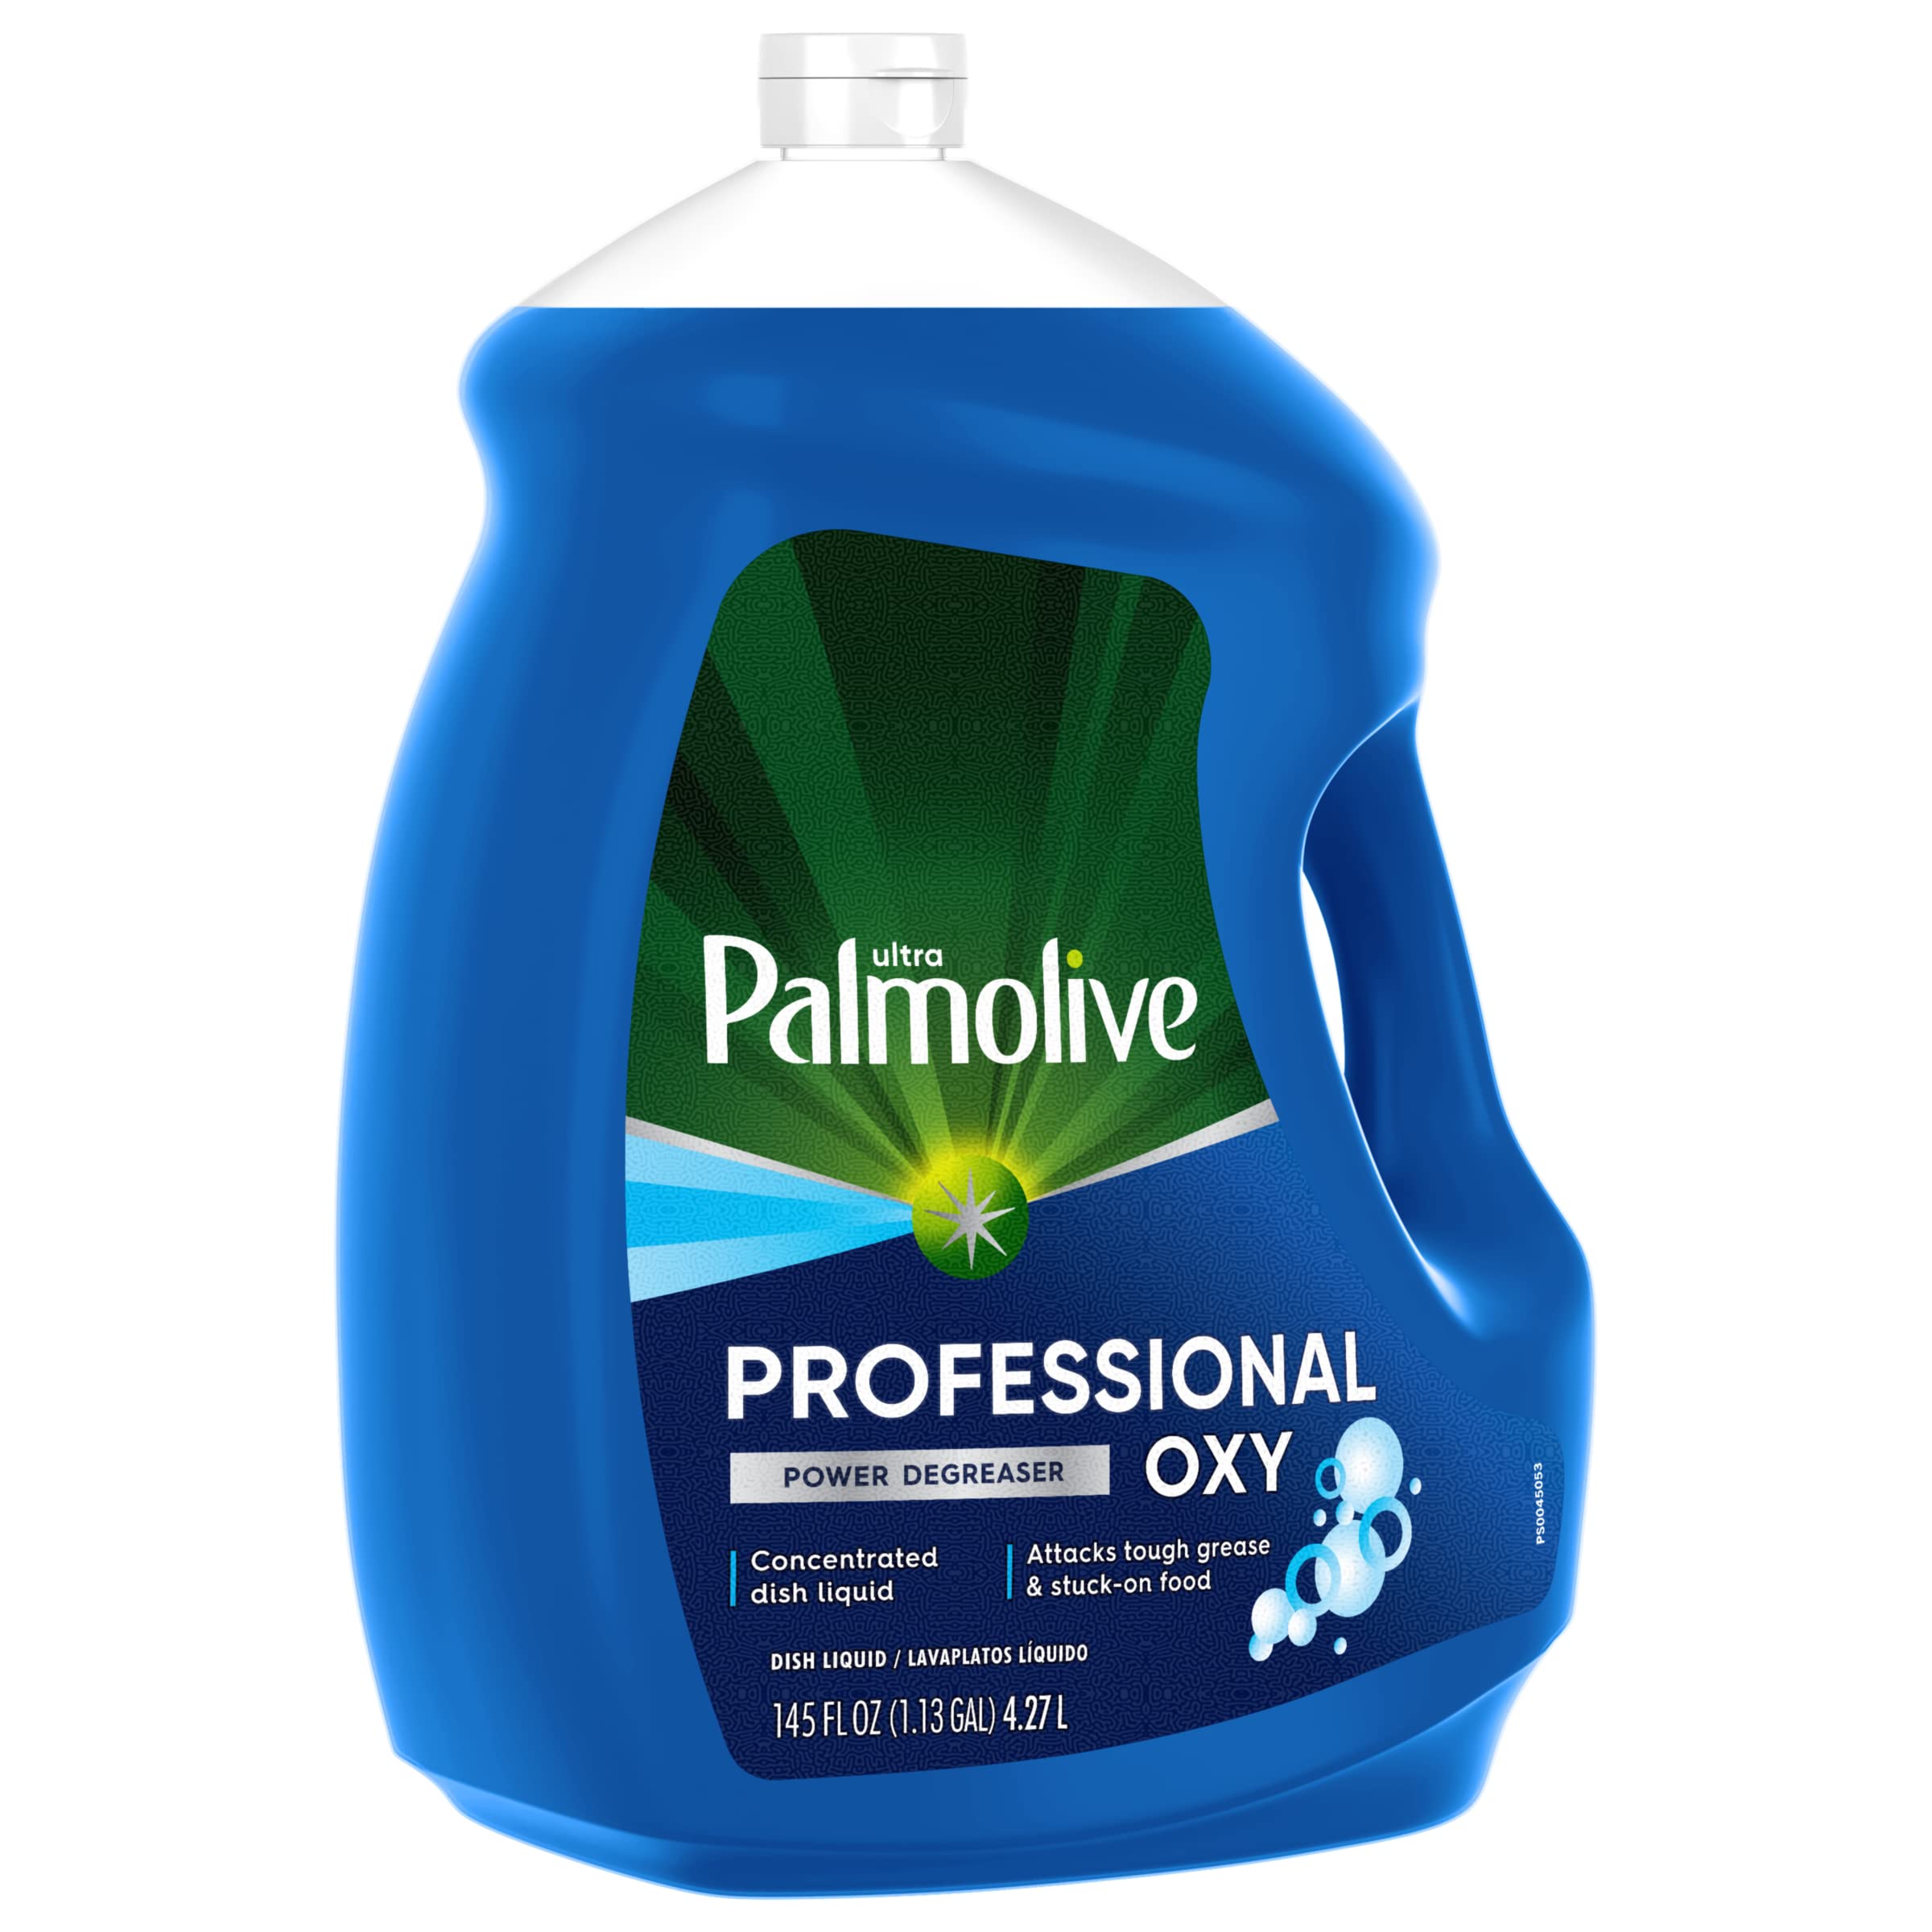 Palmolive Professional Dishwashing Liquid Dish Soap, Oxy Power Degreaser - 145 Fluid Ounce(Pack of 4)